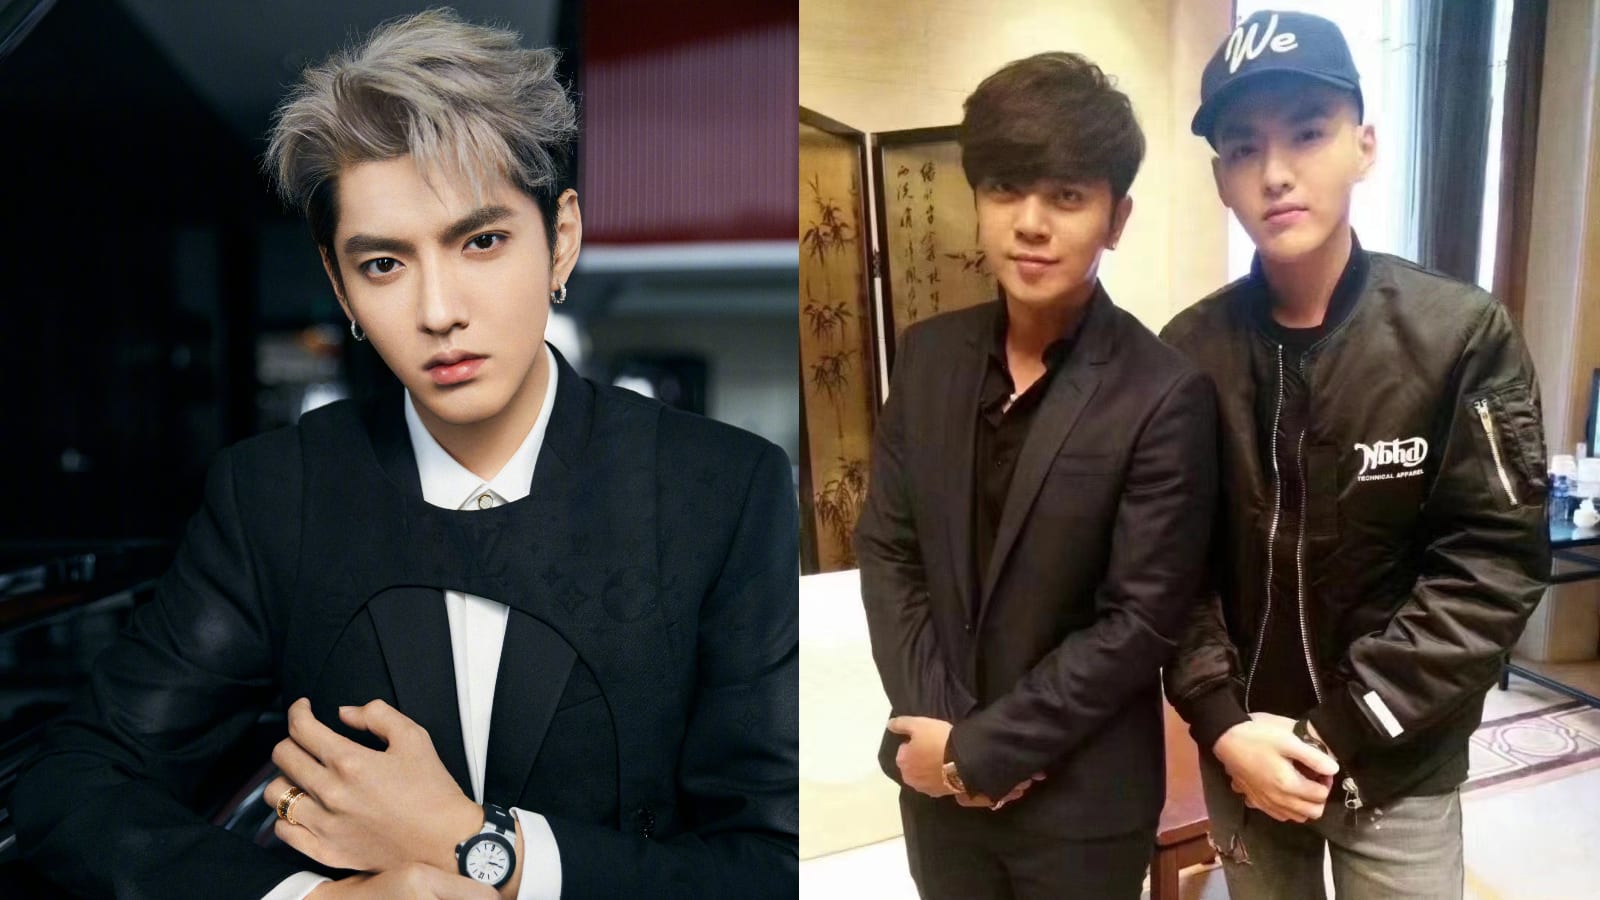 Old Pic Of Kris Wu With Show Luo Goes Viral; Netizens Call Them The “Scumbag Alliance”